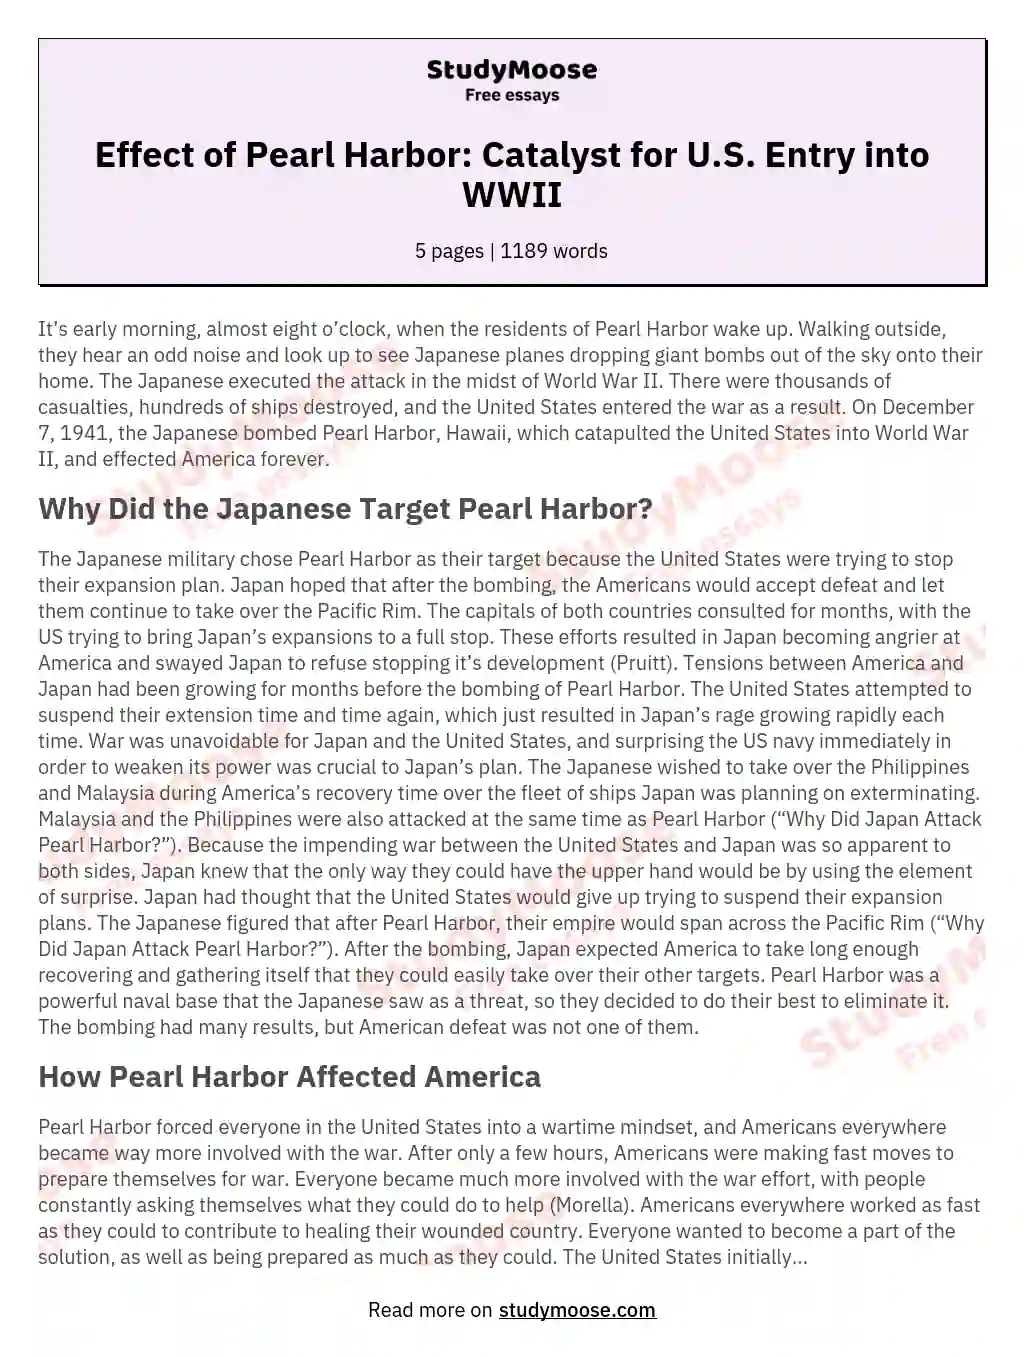 Effect of Pearl Harbor: Catalyst for U.S. Entry into WWII essay